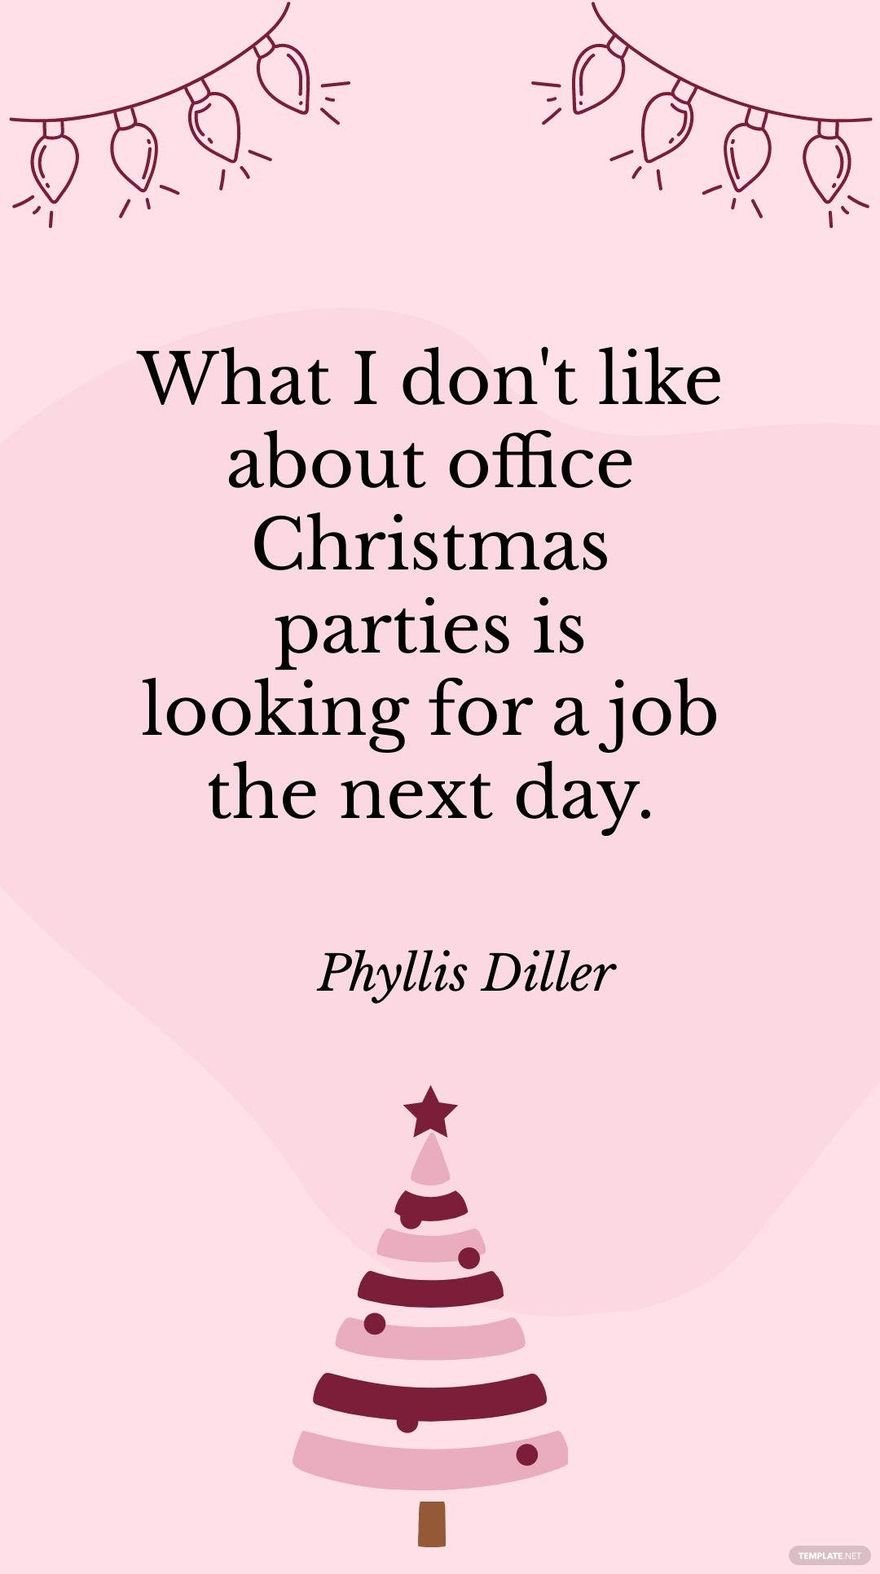 Free Phyllis Diller - What I don't like about office Christmas parties is looking for a job the next day. in JPG